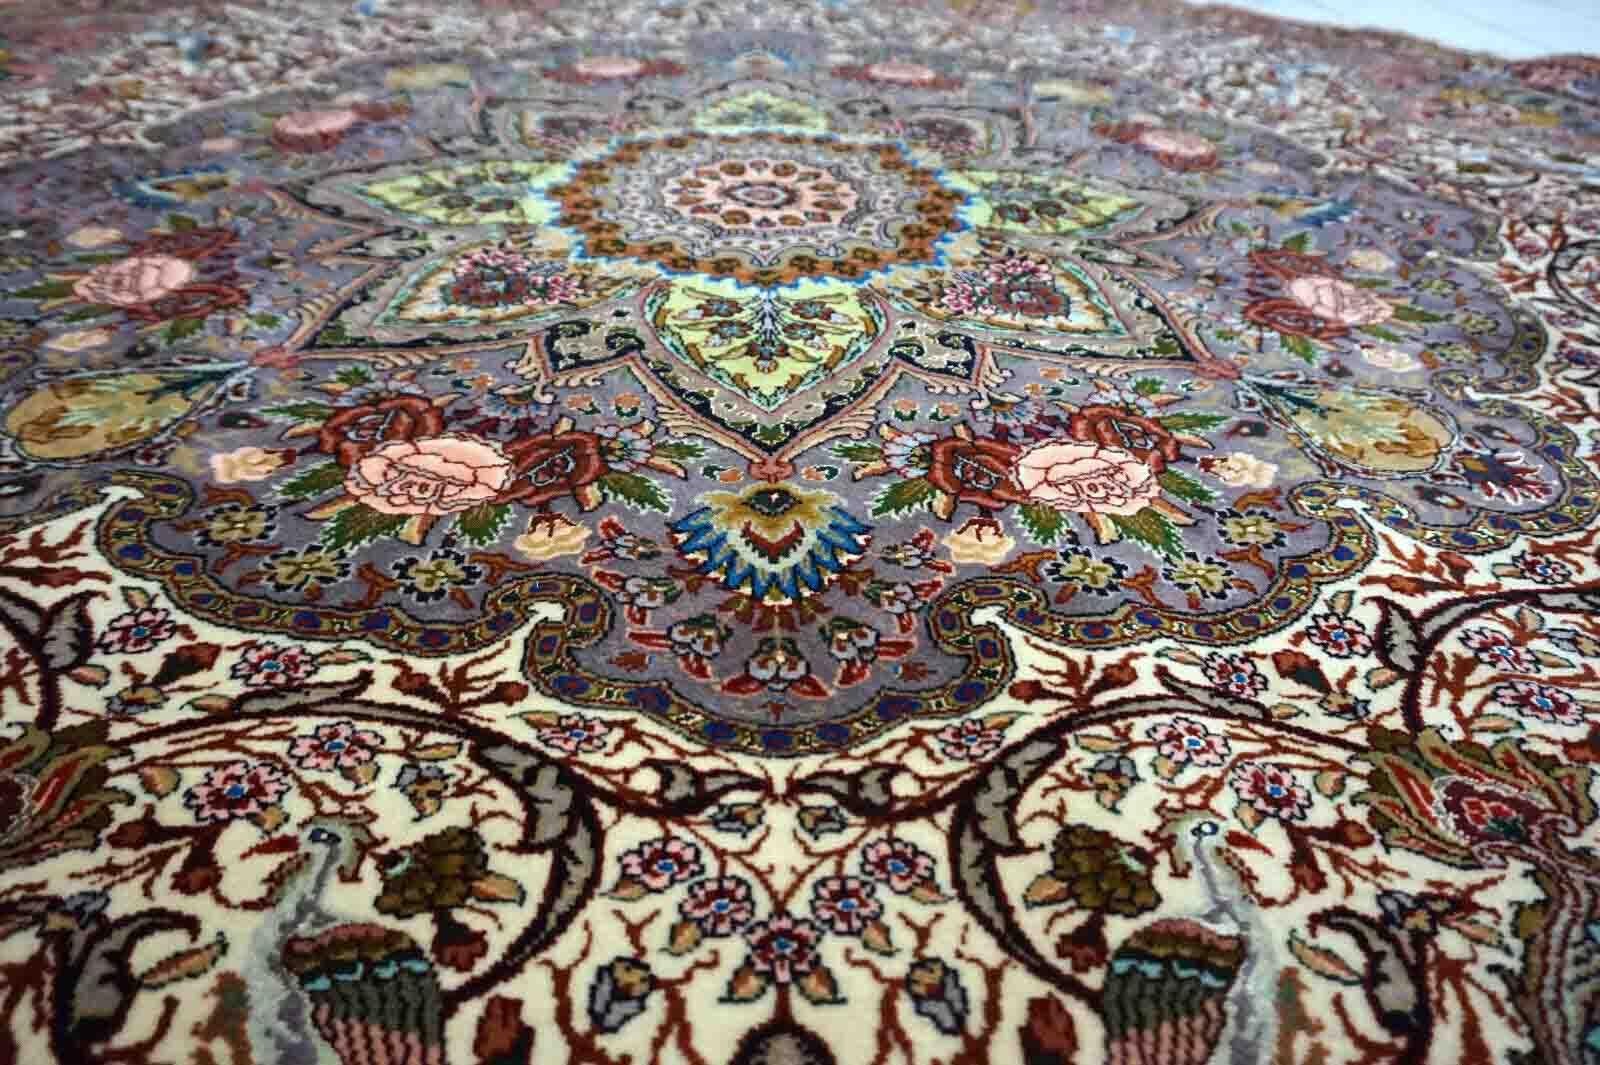 Introducing a stunning vintage Persian Tabriz rug from the 1970s! This exquisite rug features a round shape with a diameter of 6.5 feet (200cm), making it a perfect centerpiece for any room. The rug is made of high-quality wool and silk, which adds